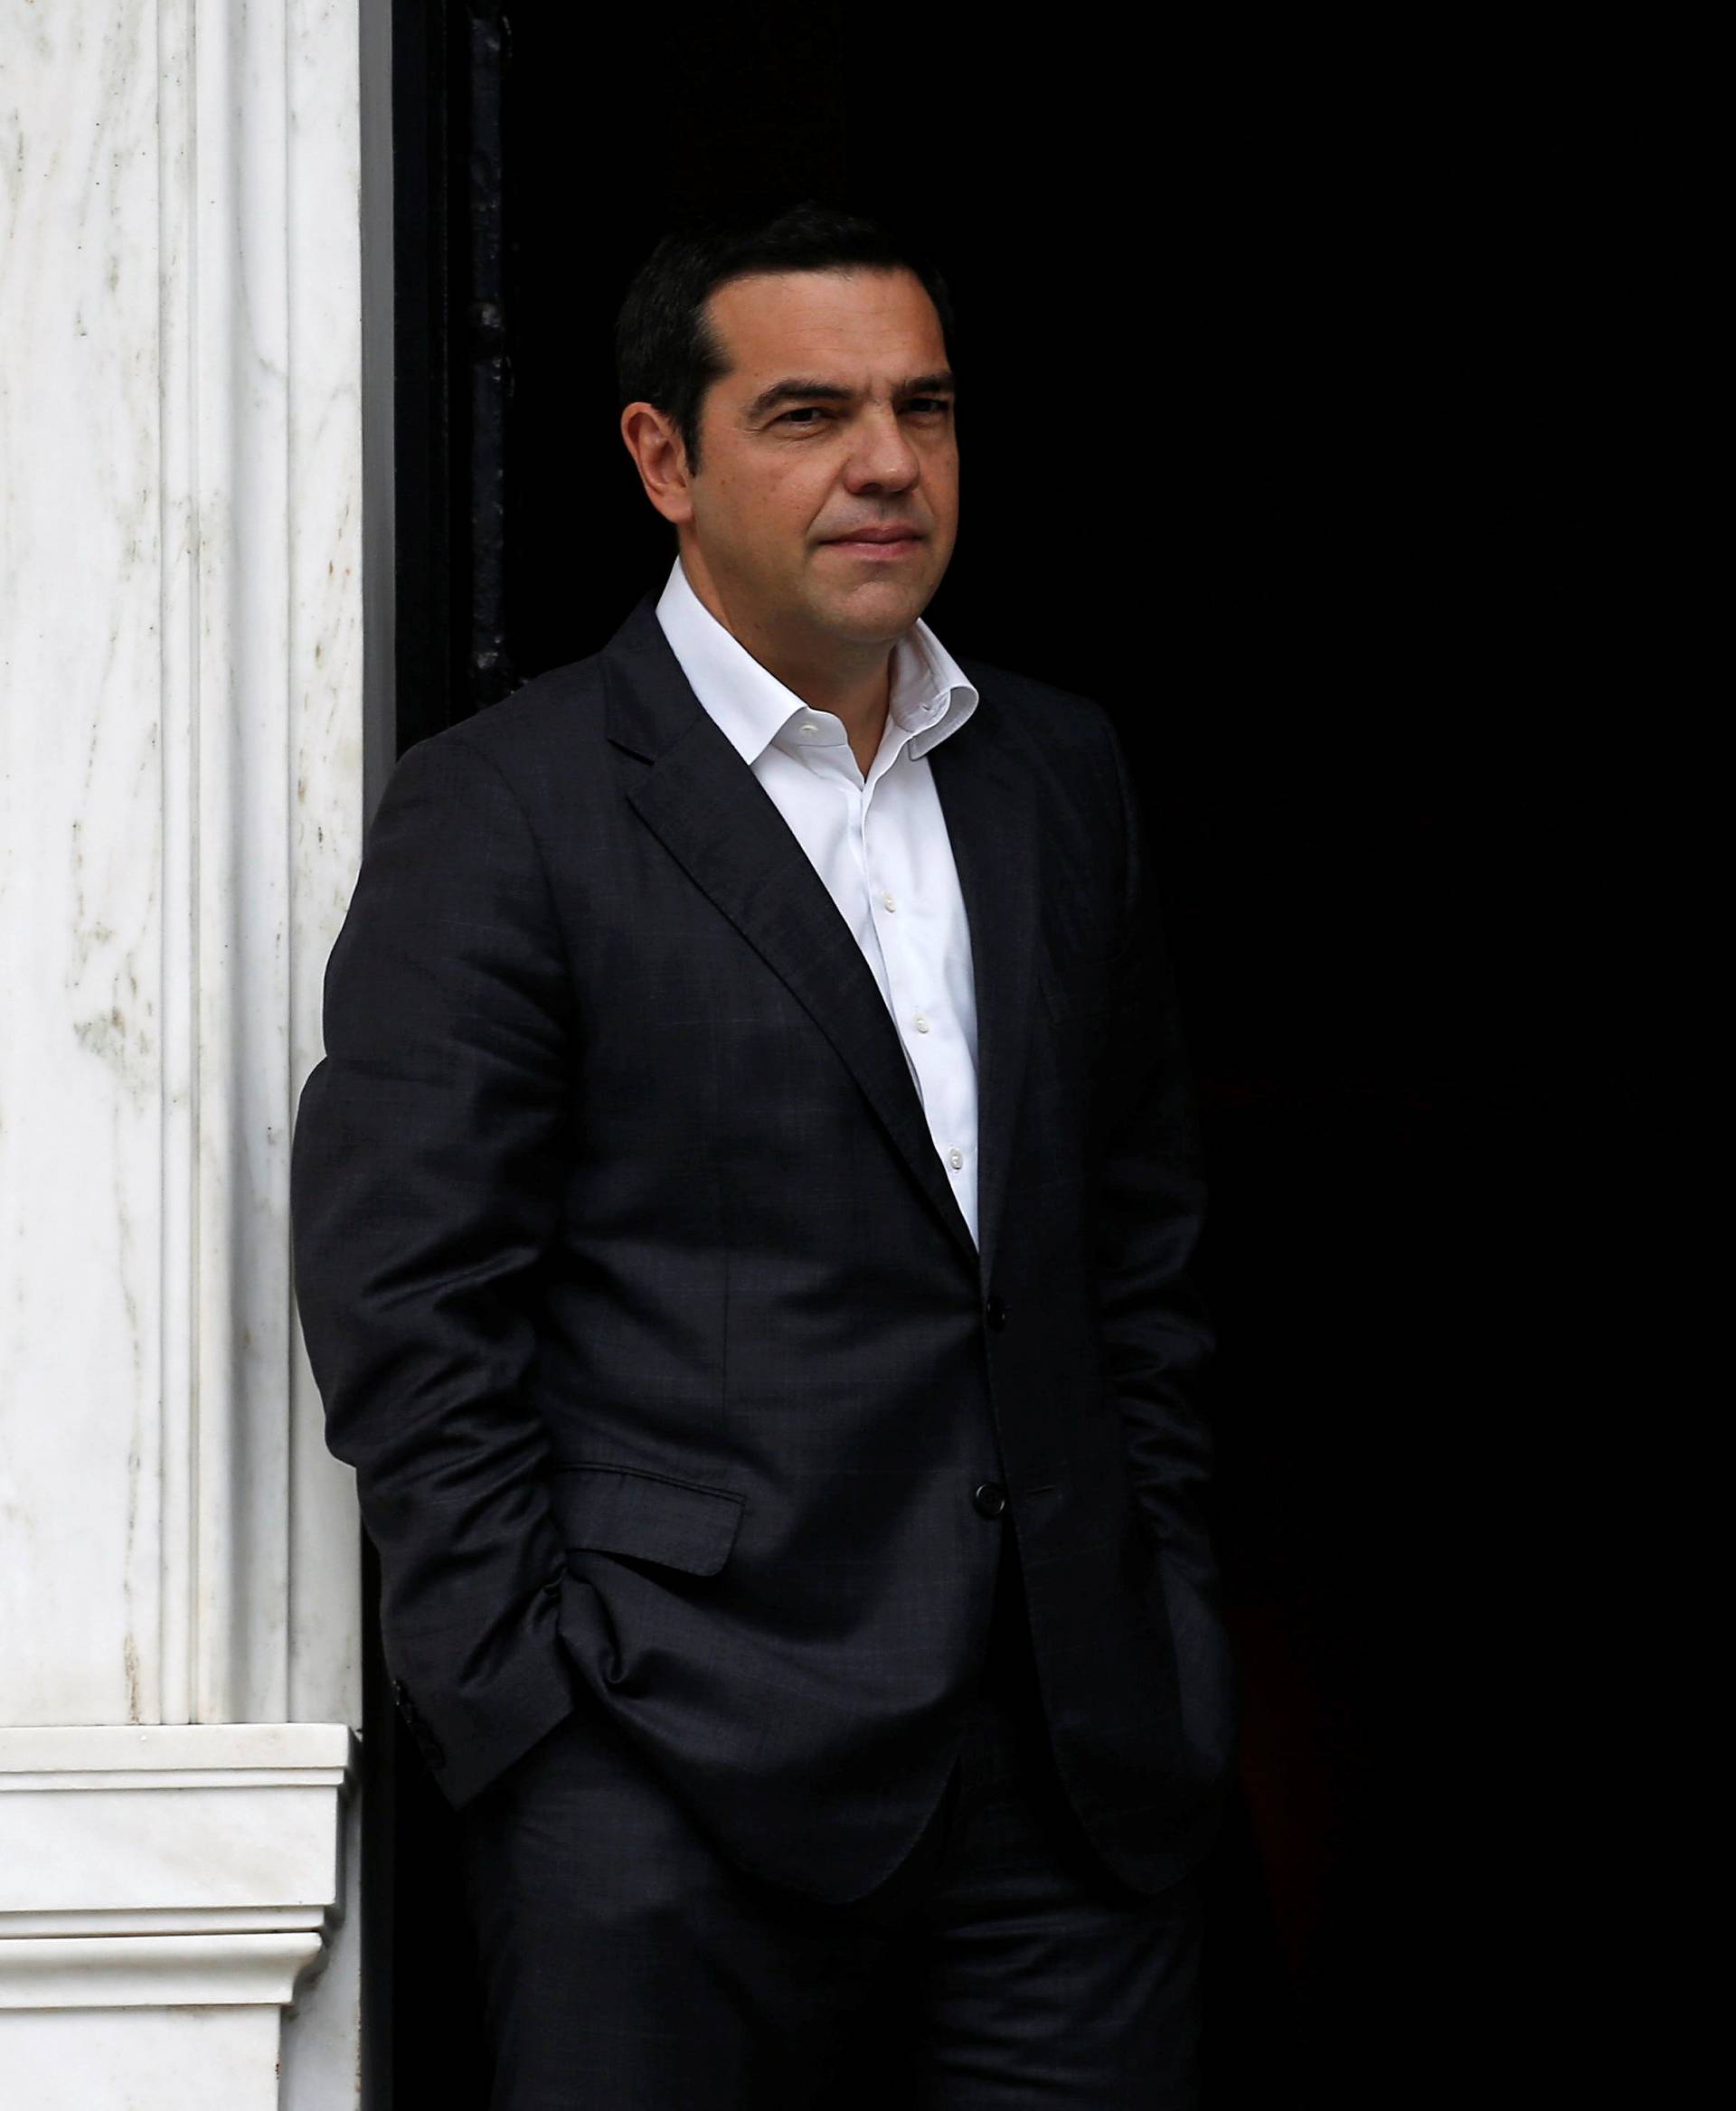 Greek Prime Minister Alexis Tsipras waits for former French President Francois Hollande at his office in the Maximos Mansion in Athens